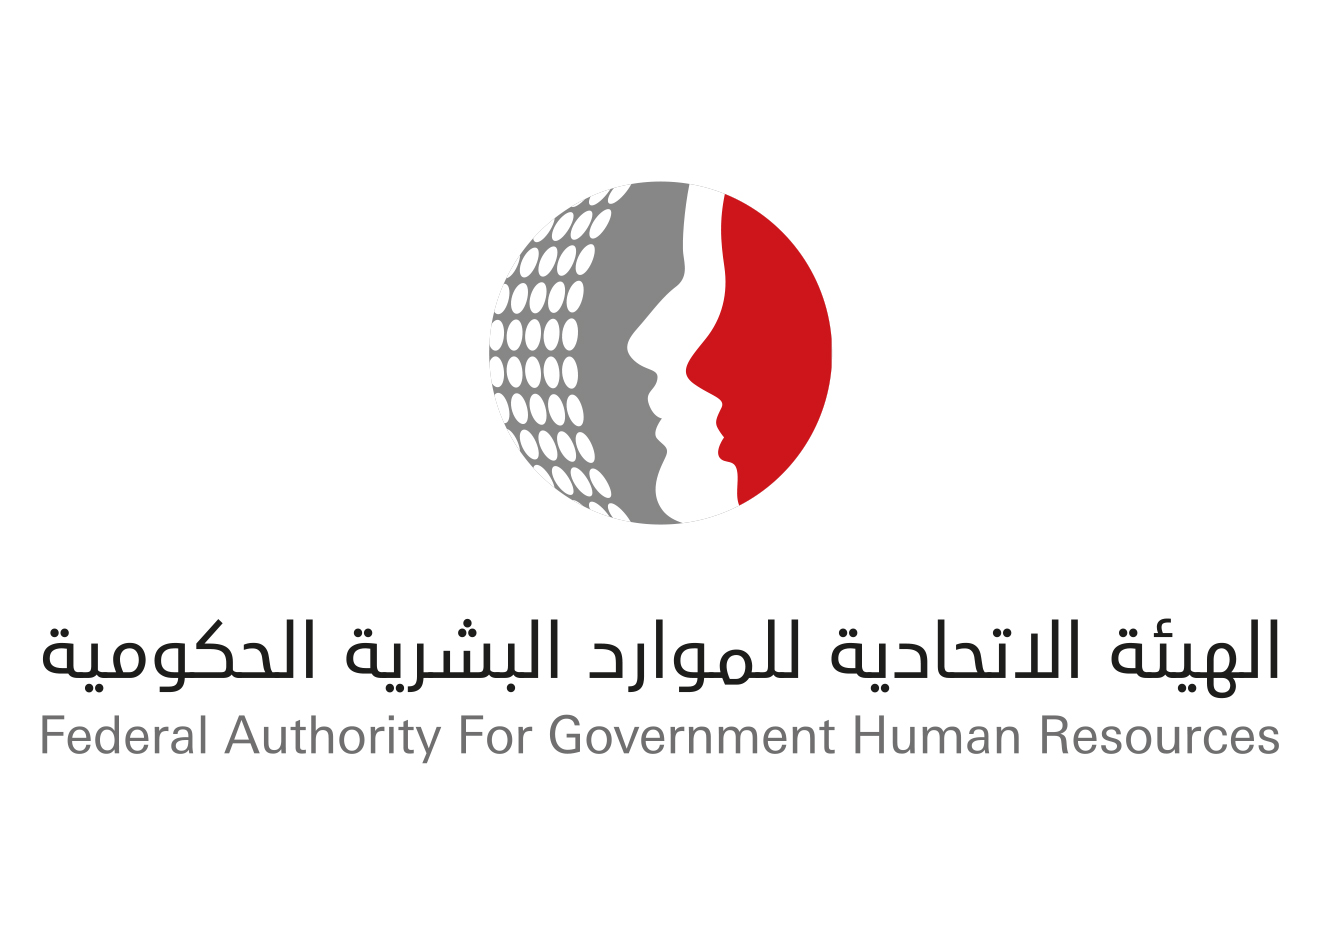 Cooperation between FAHR and Government of Ras Al Khaimah to develop national competencies within “Jahiz”